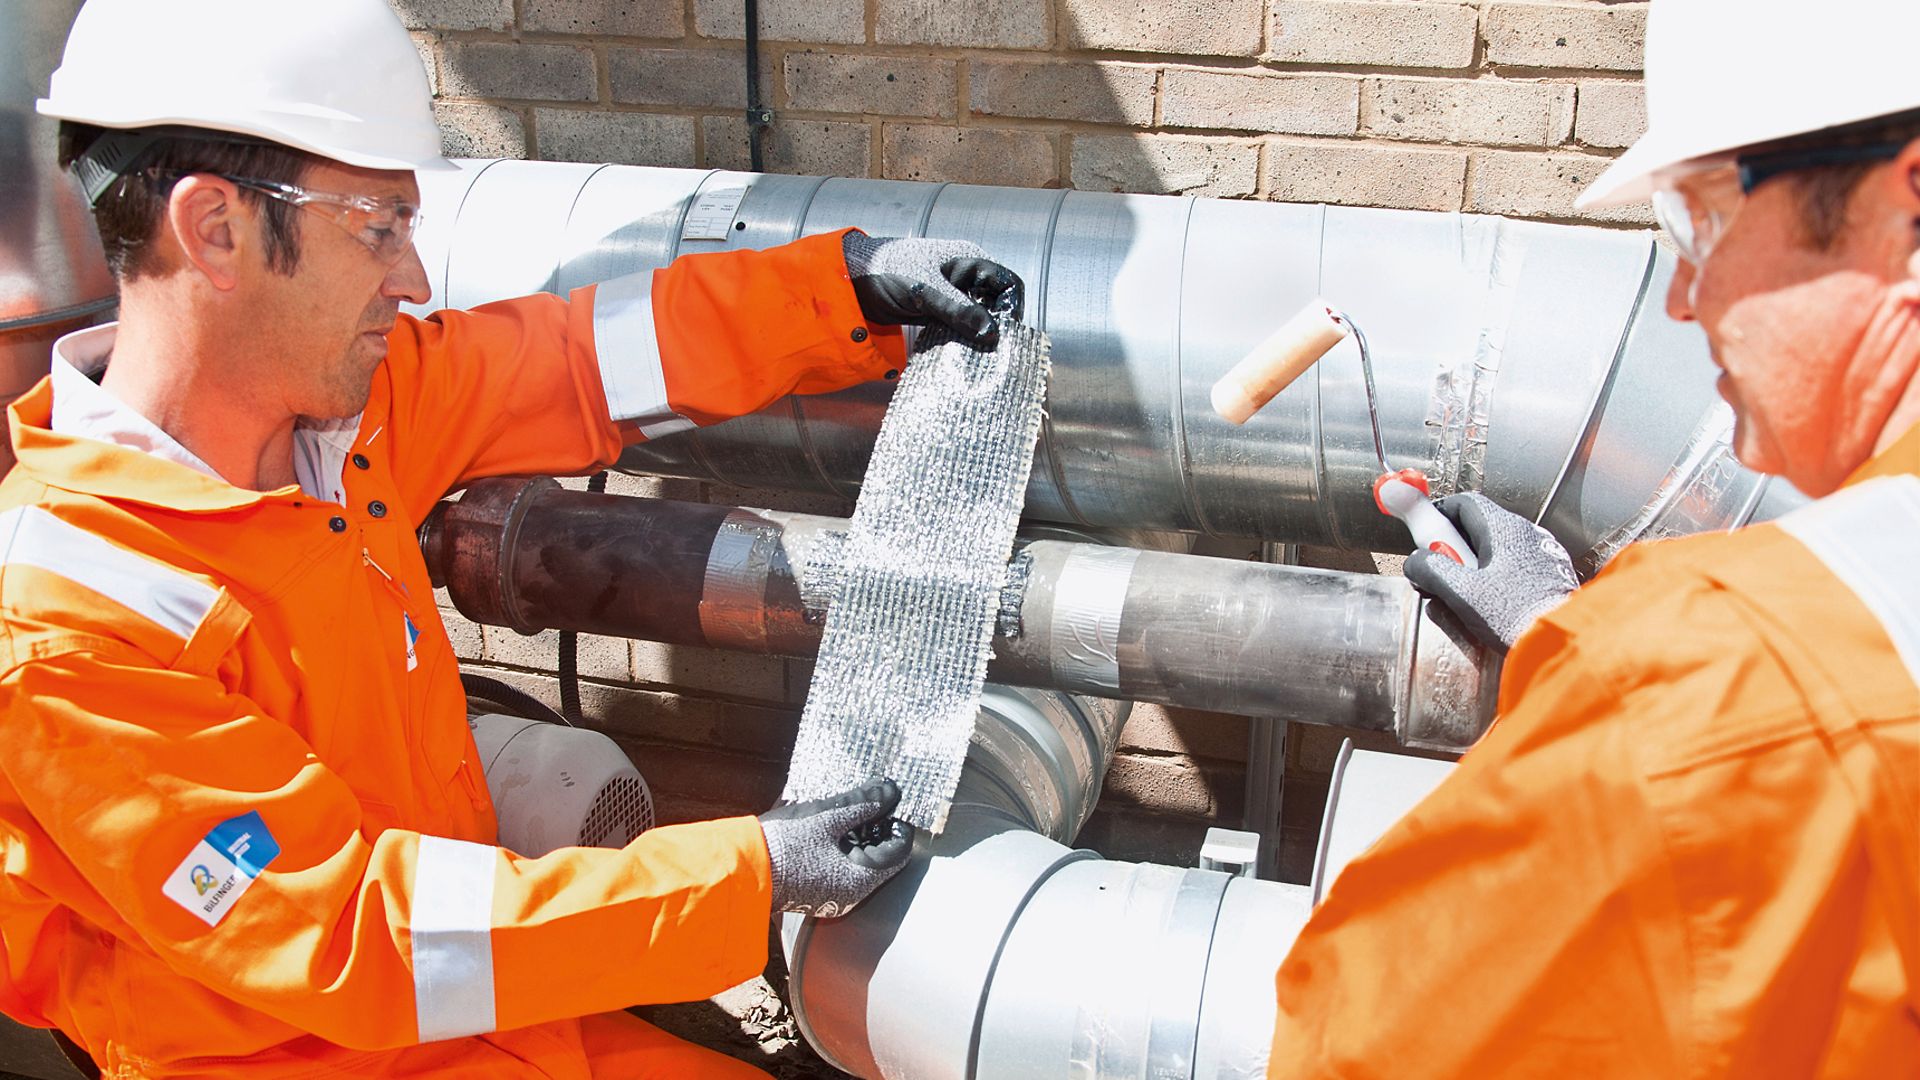 Bilfinger experts repair pipes with products from Henkel